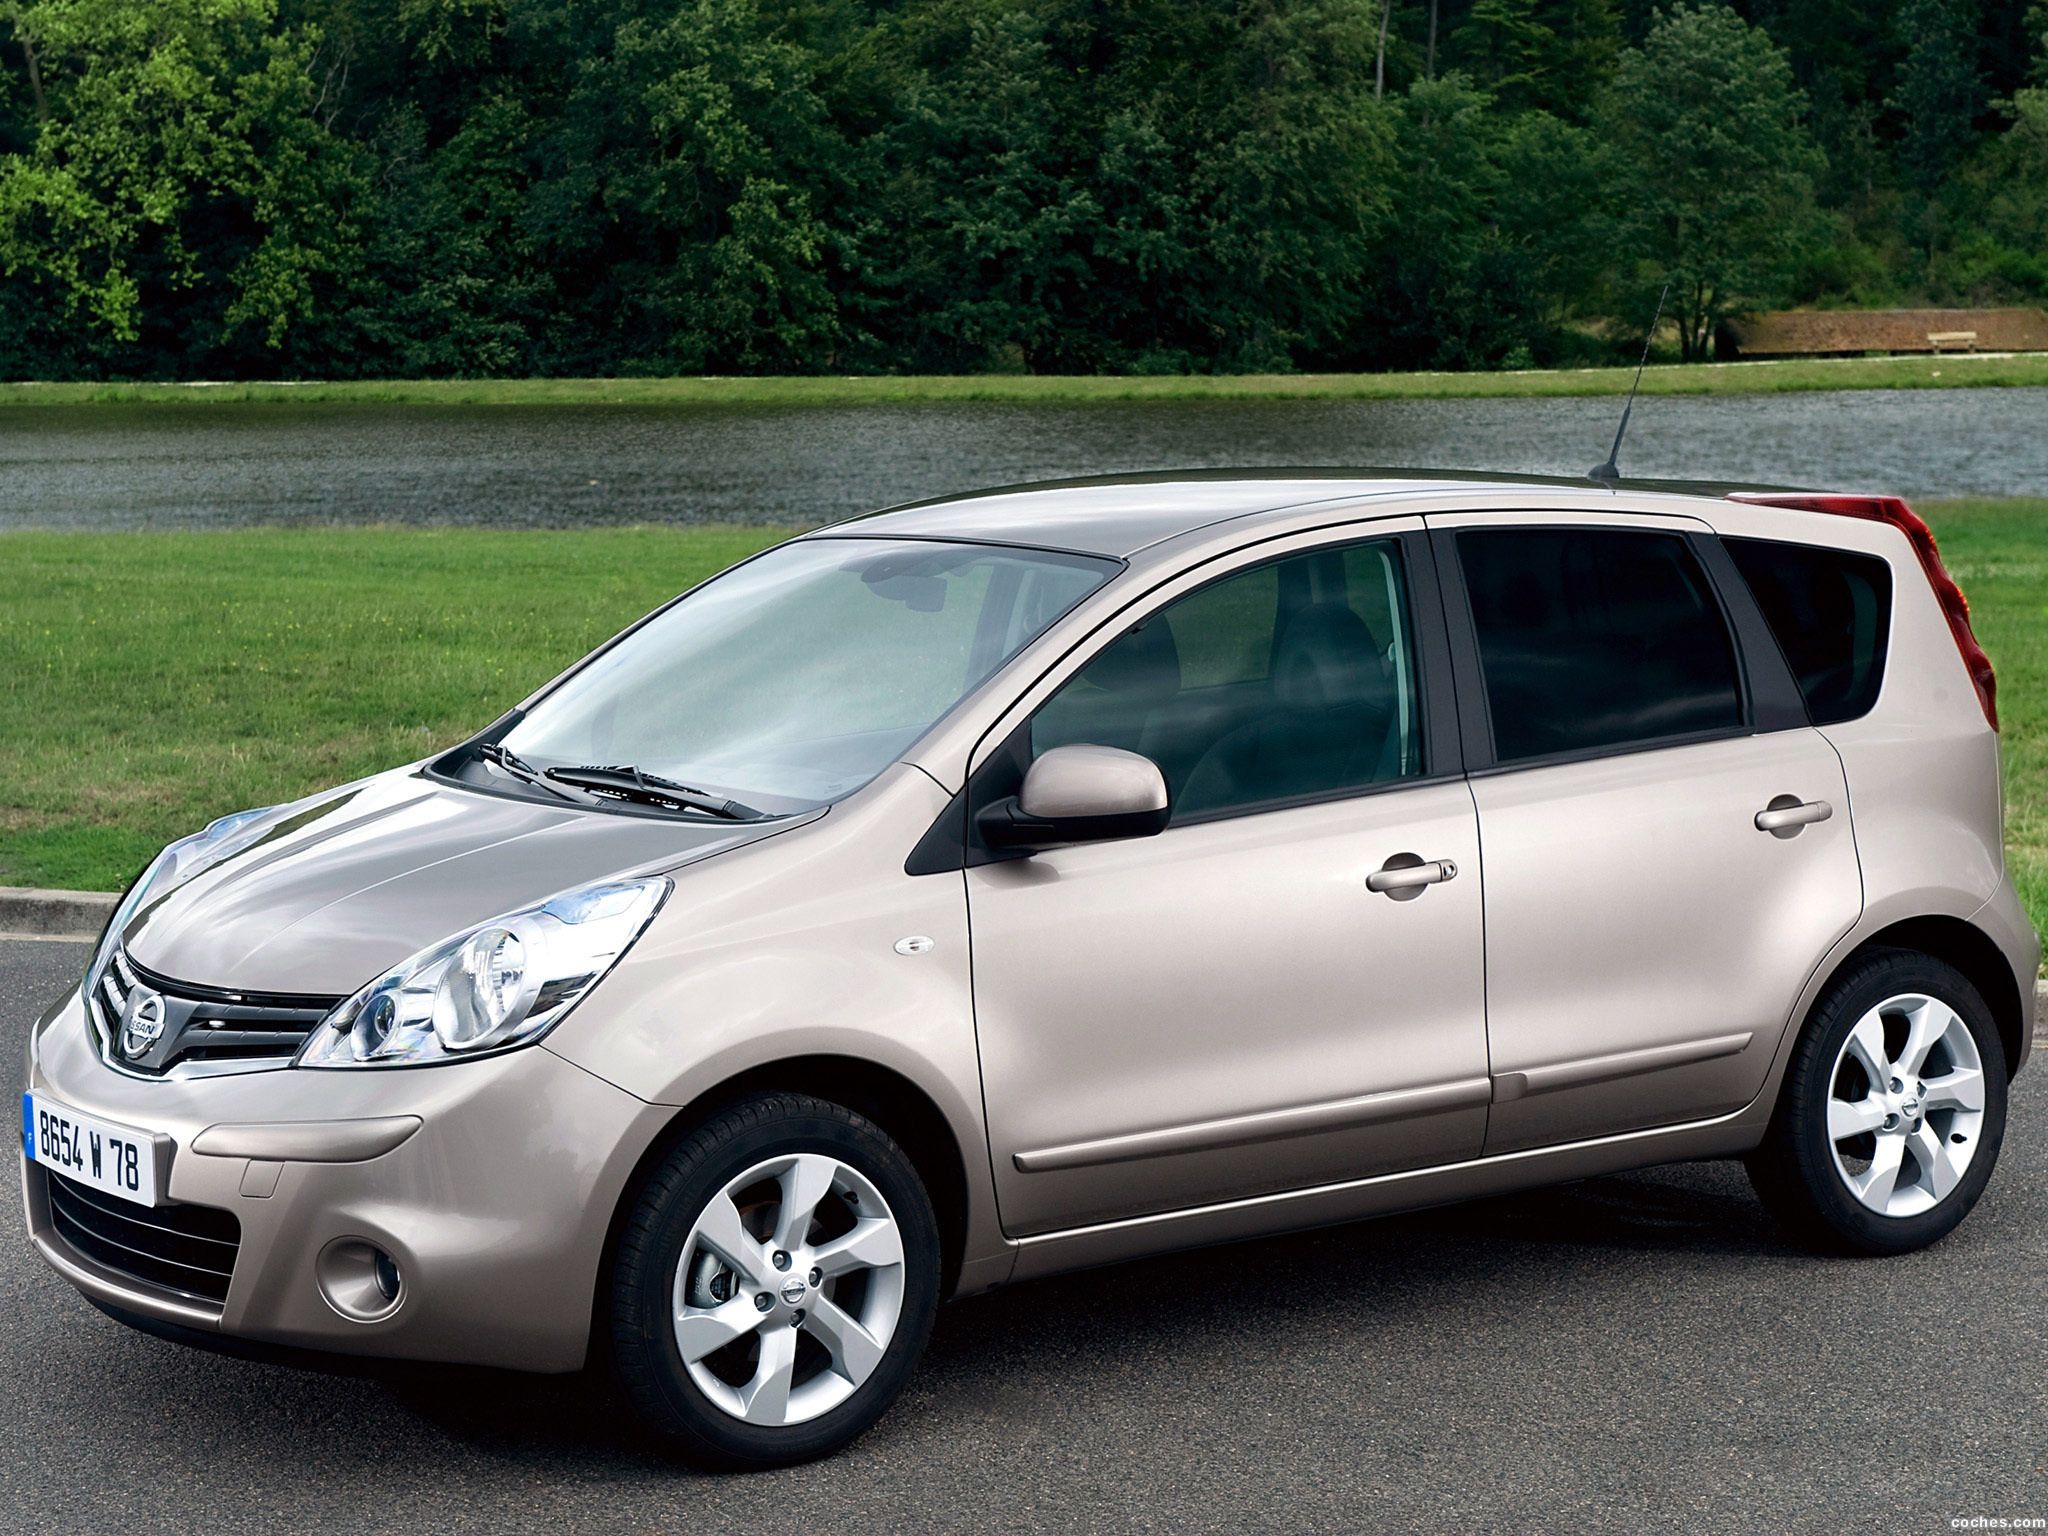 nissan_note-uk-2008_r13